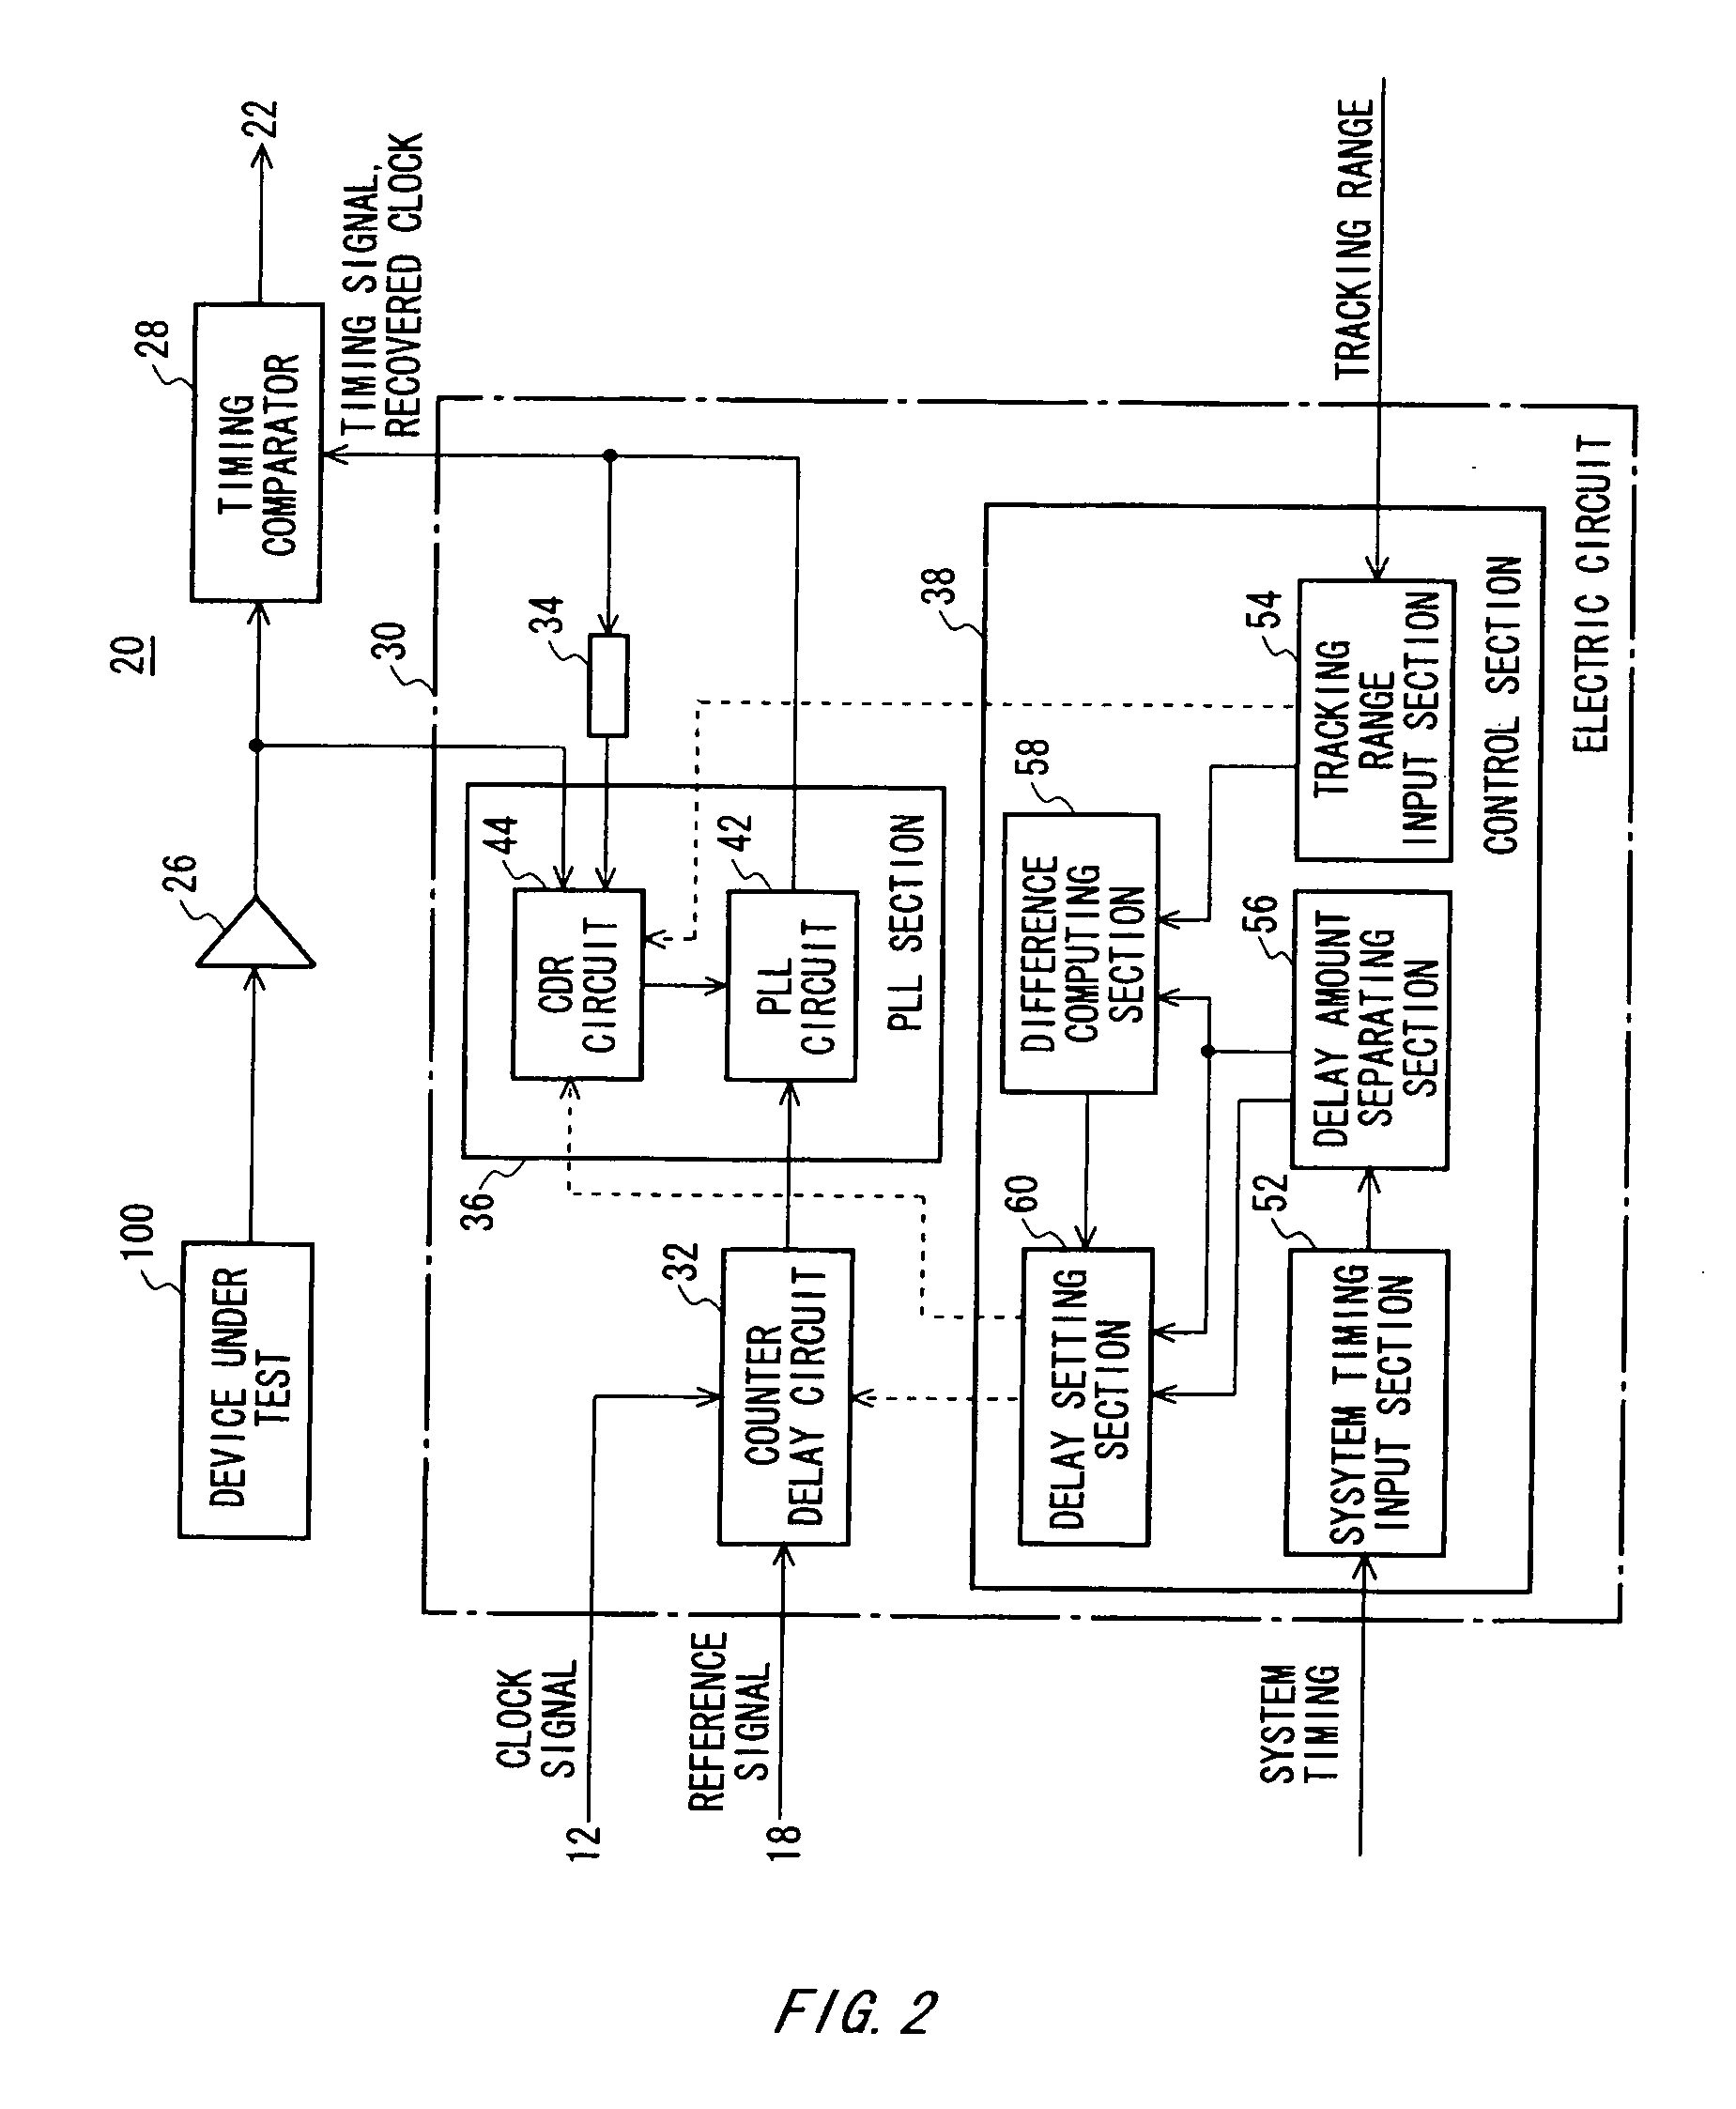 Electric circuit and test apparatus